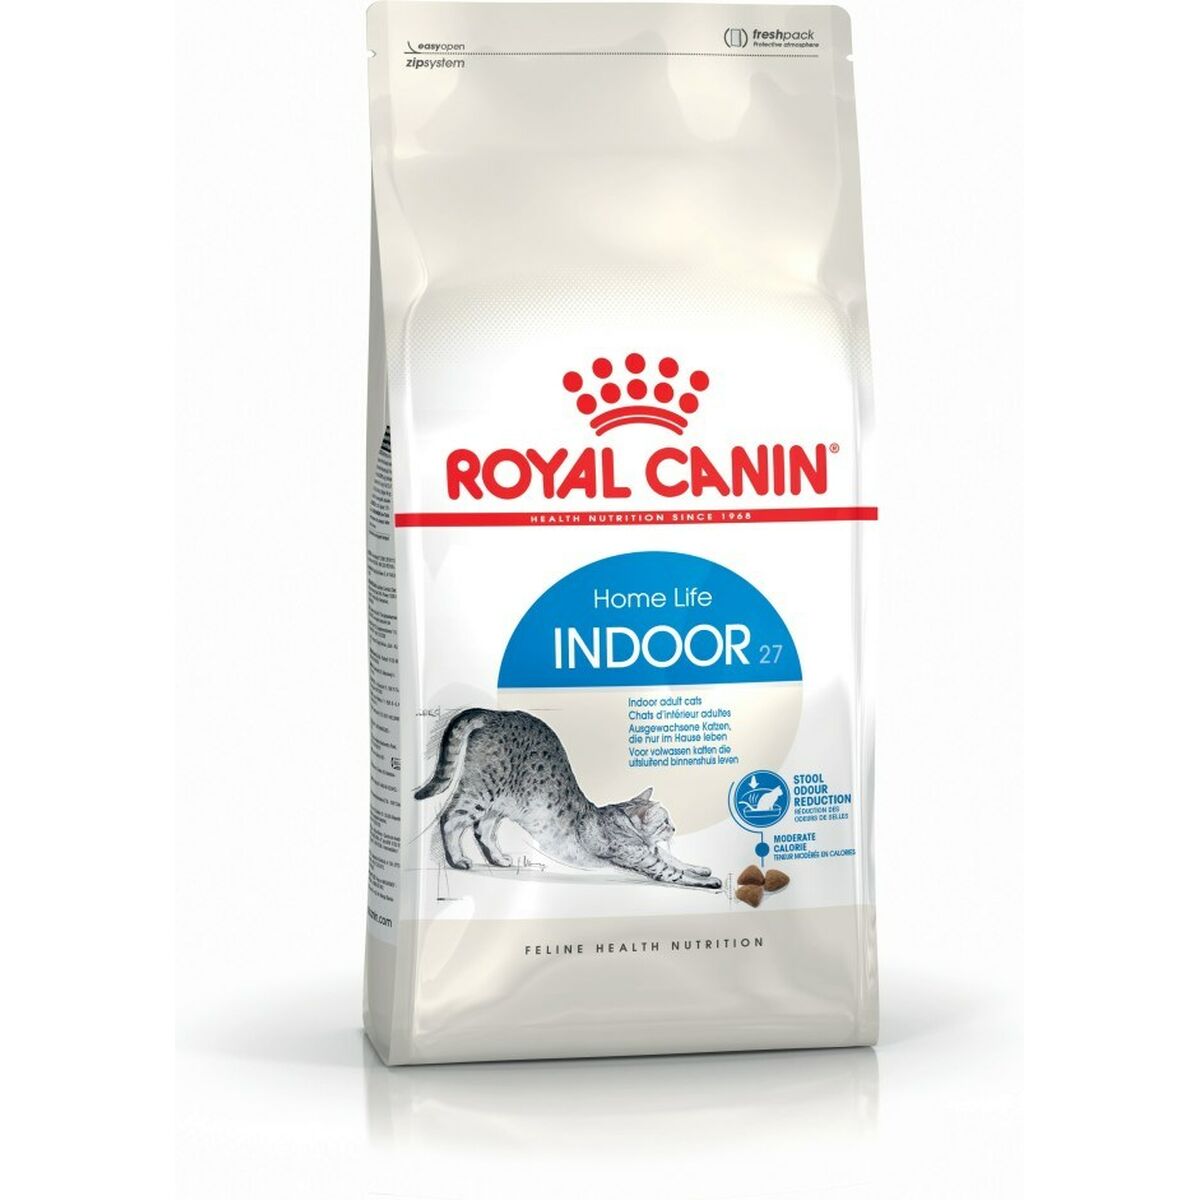 Aliments pour chat Royal Canin Home Life Indoor 27 Adulte Poulet 400 g